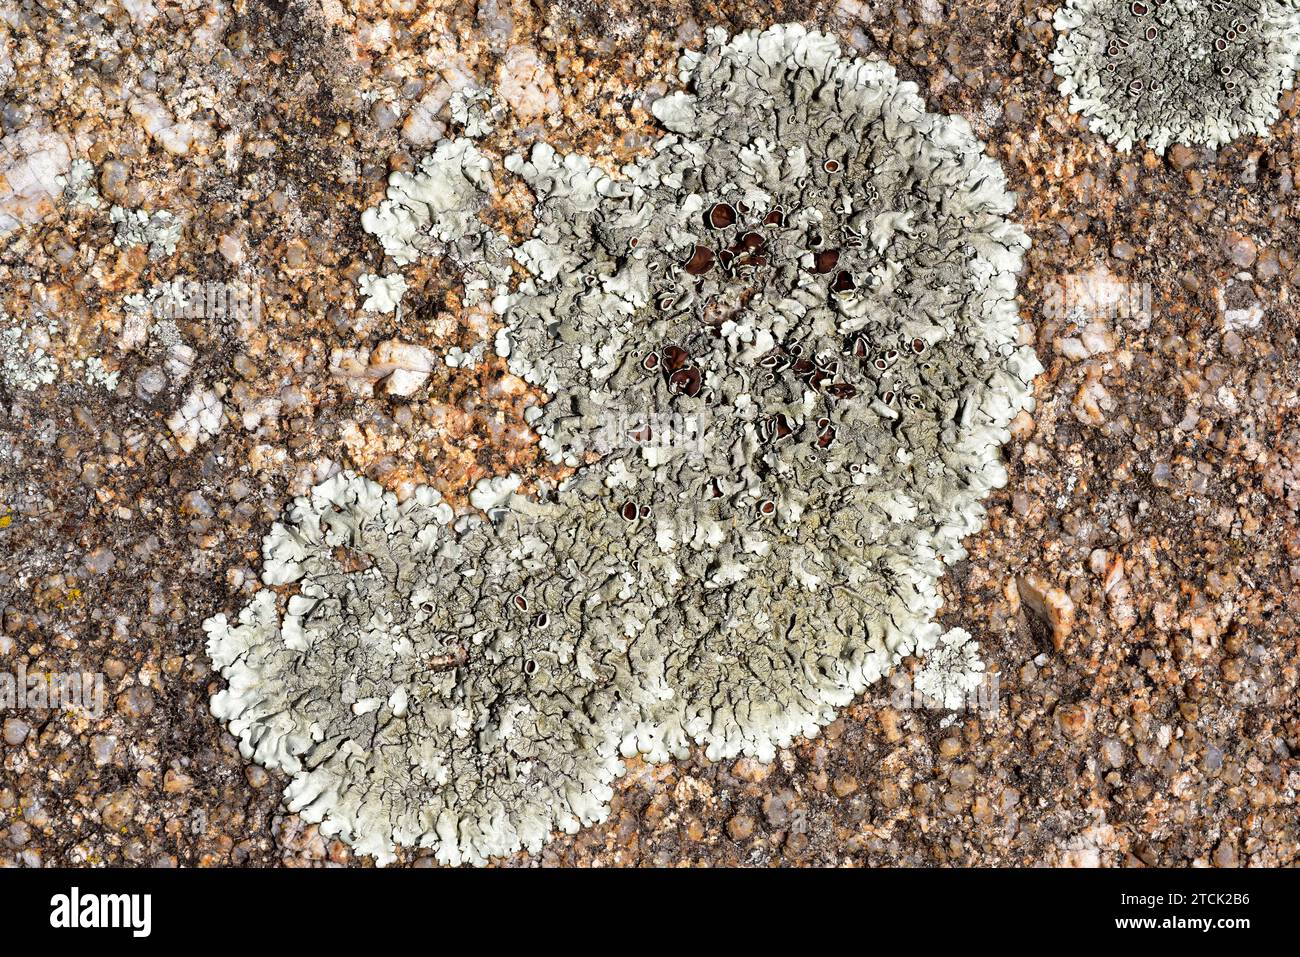 Xanthoparmelia conspersa or Parmelia conspersa is a foliose lichen that grows on siliceous rocks. This photo was taken in La Albera, Girona province, Stock Photo